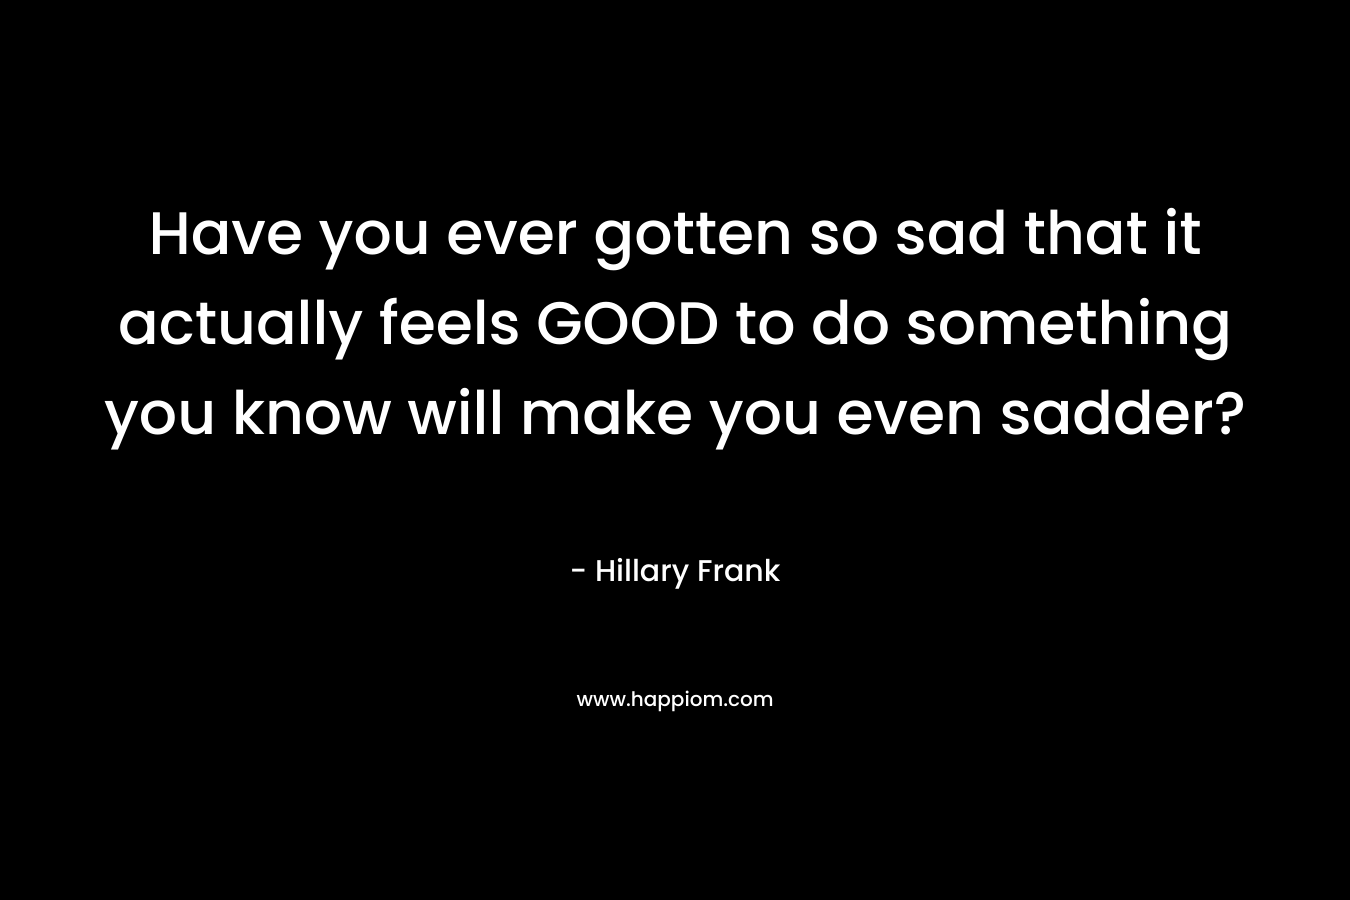 Have you ever gotten so sad that it actually feels GOOD to do something you know will make you even sadder? – Hillary Frank